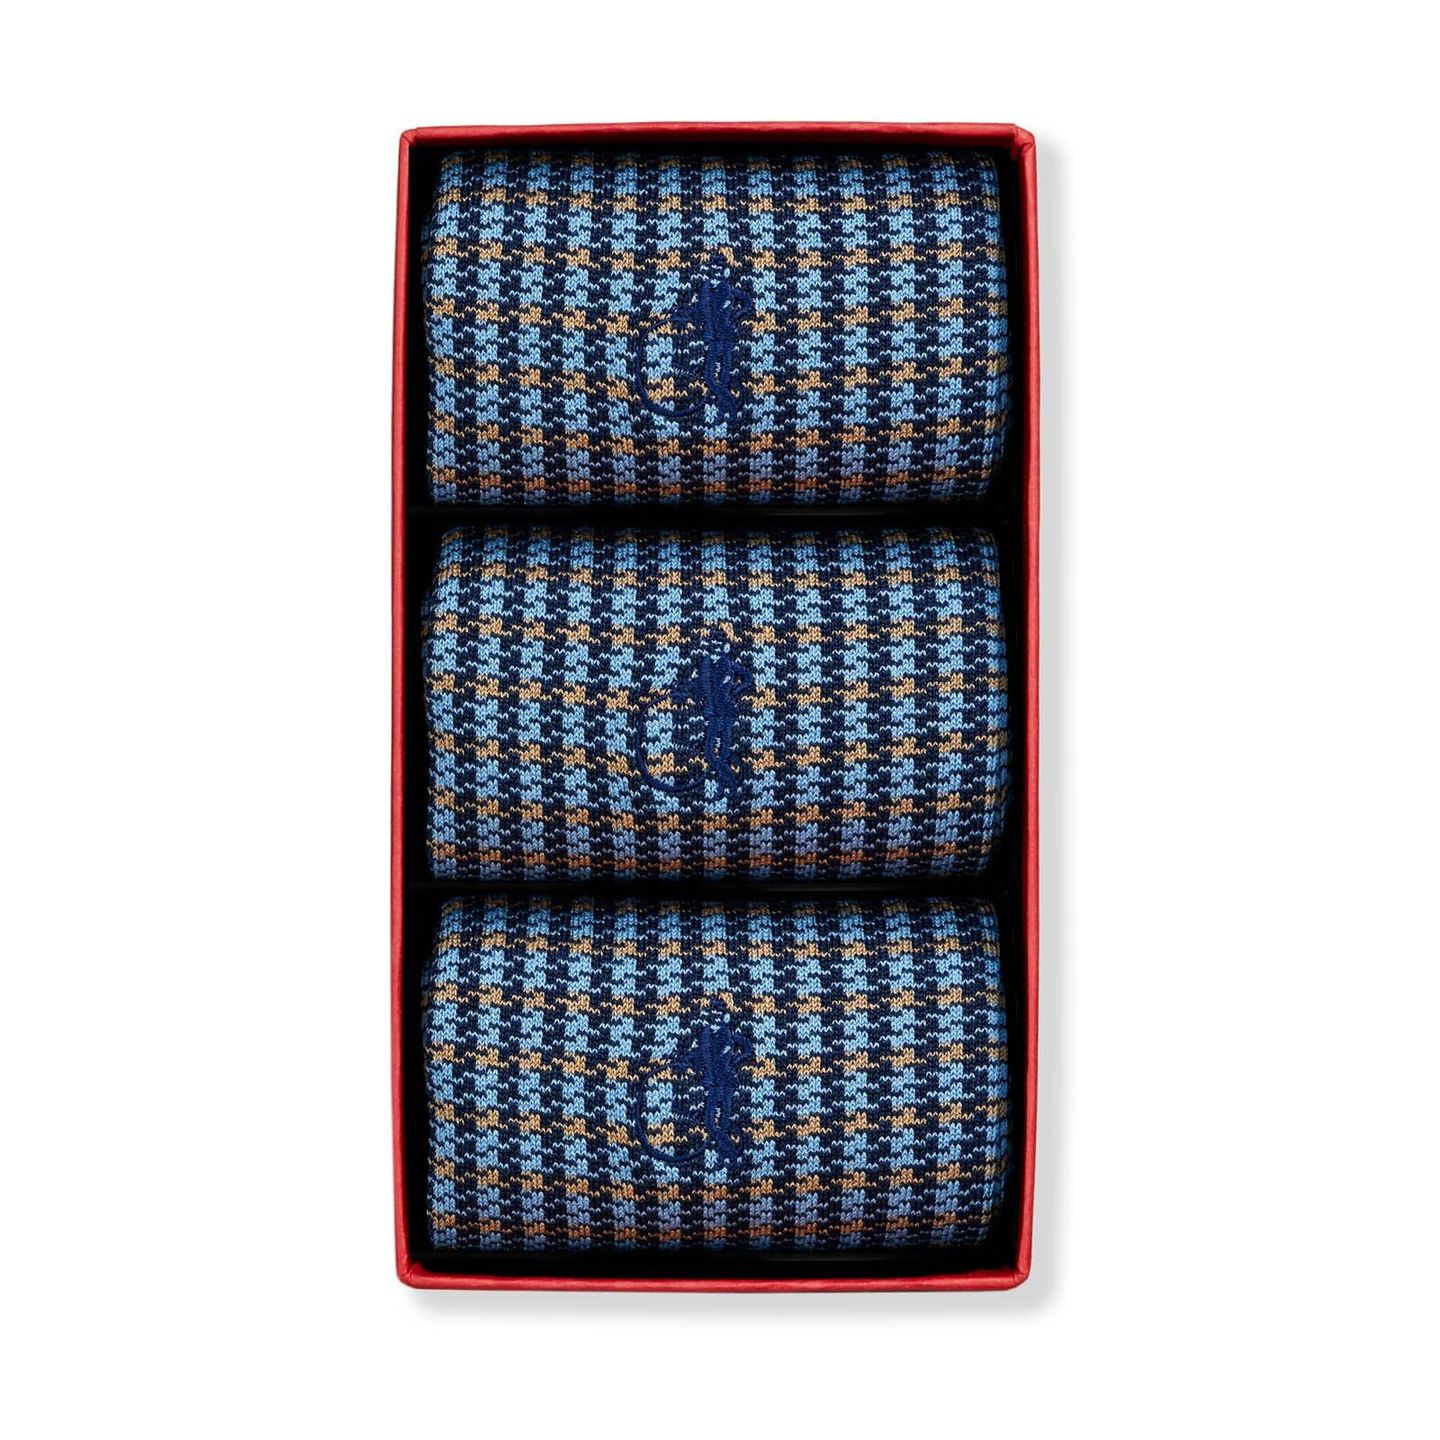 3 pair of blue and yellow chequered socks in a box